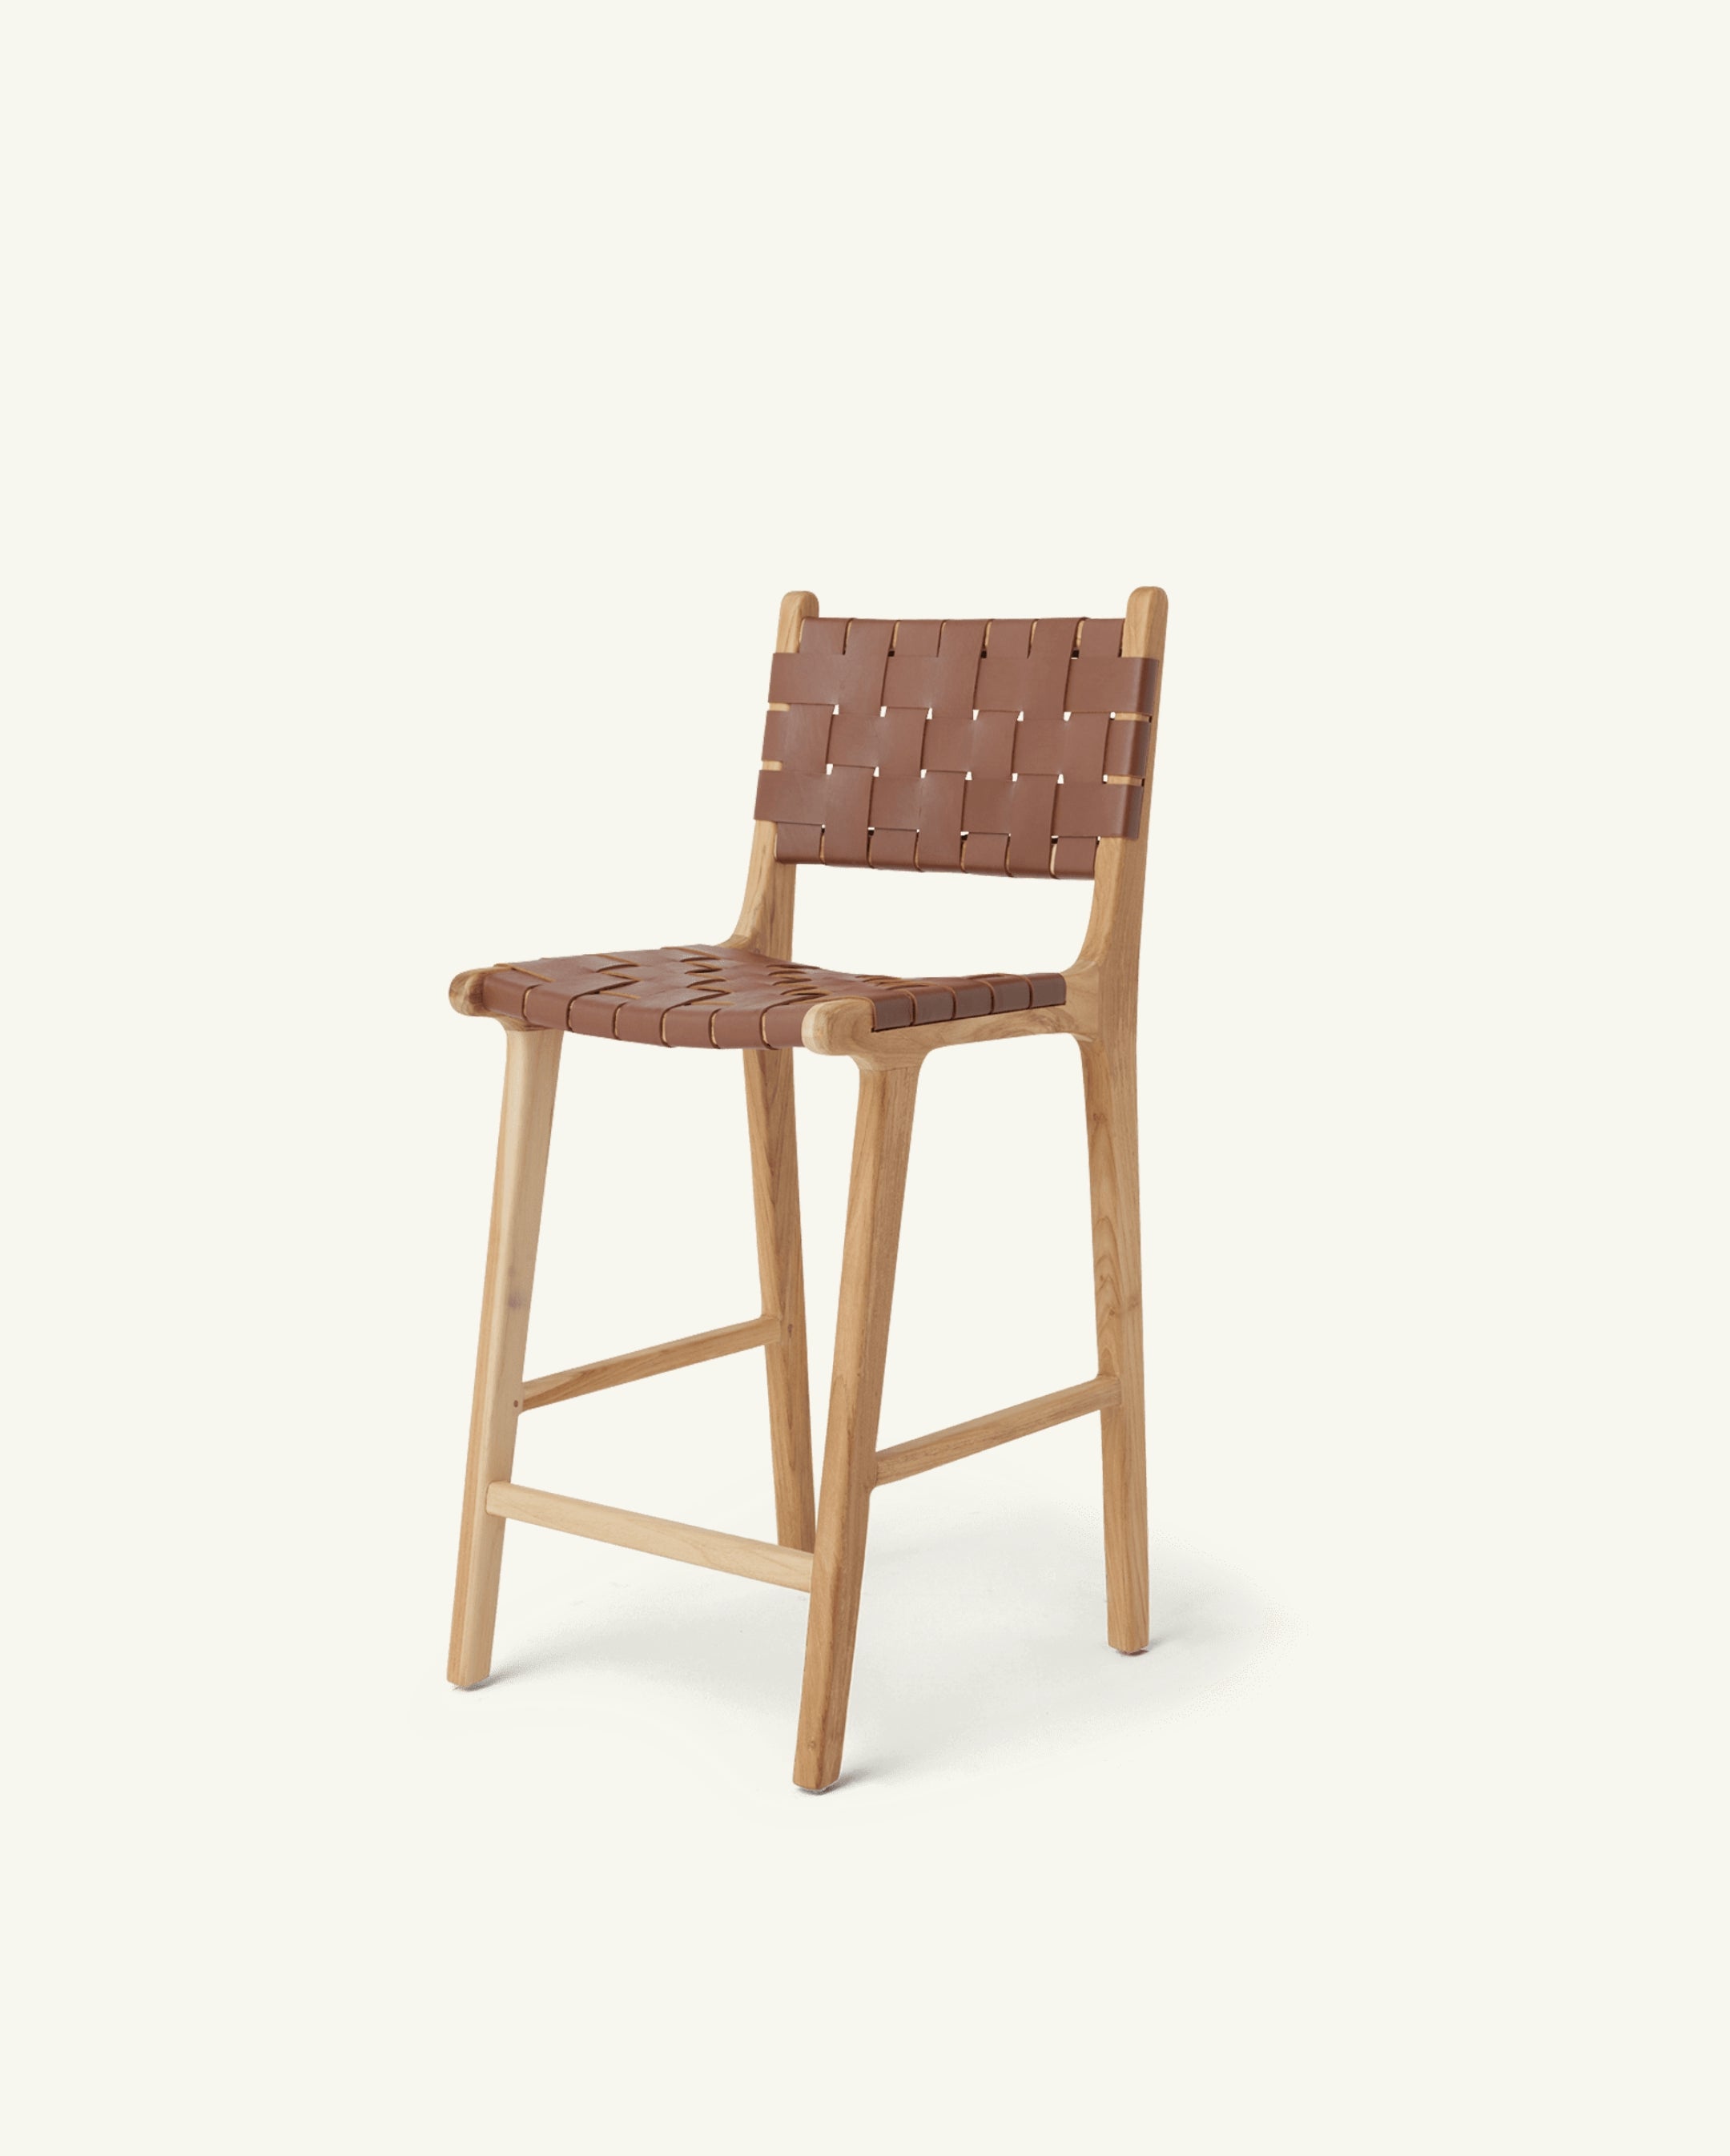 Stool #2 - Counter Stool in Teak with Woven Neutral Leather – Hati 